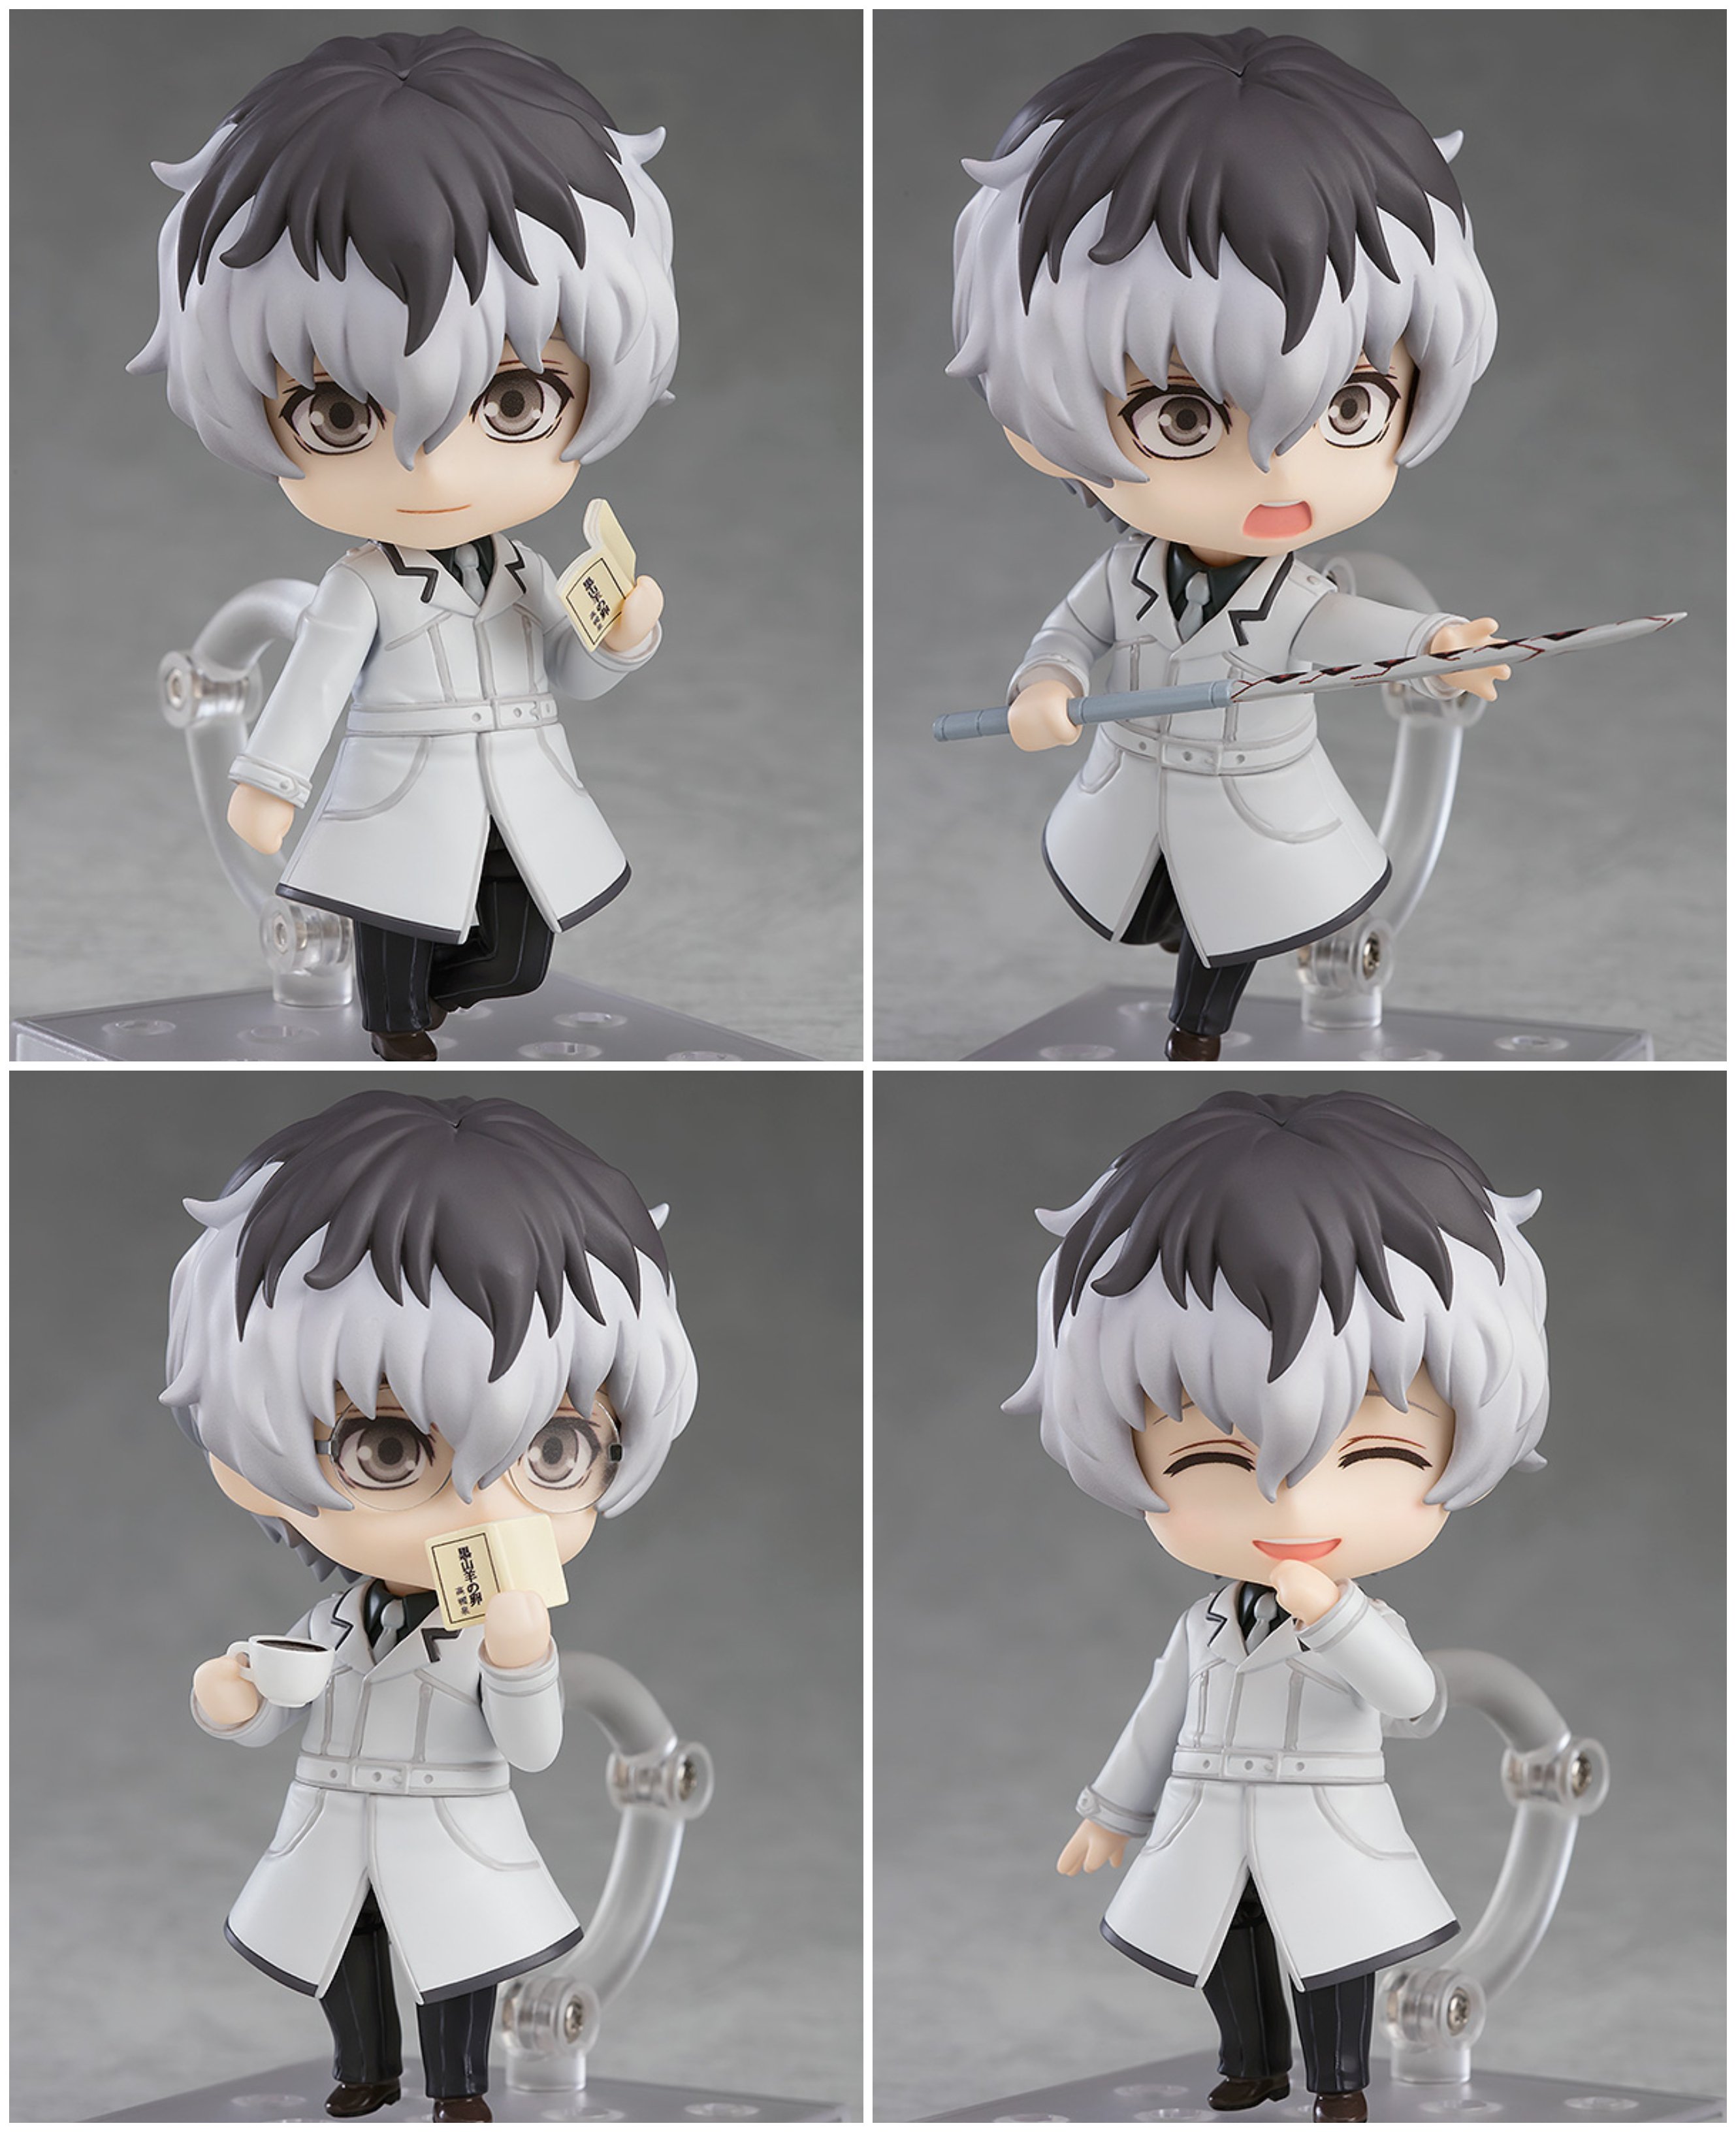 GoodSmile_US on Twitter: "【PRE-ORDER】Nendoroid Haise Sasaki ➡️ https://t.co/cqj0wiYFGo From the anime series comes a Nendoroid of the kind-hearted investigator, Sasaki! Accessories include a cup of coffee, a book,